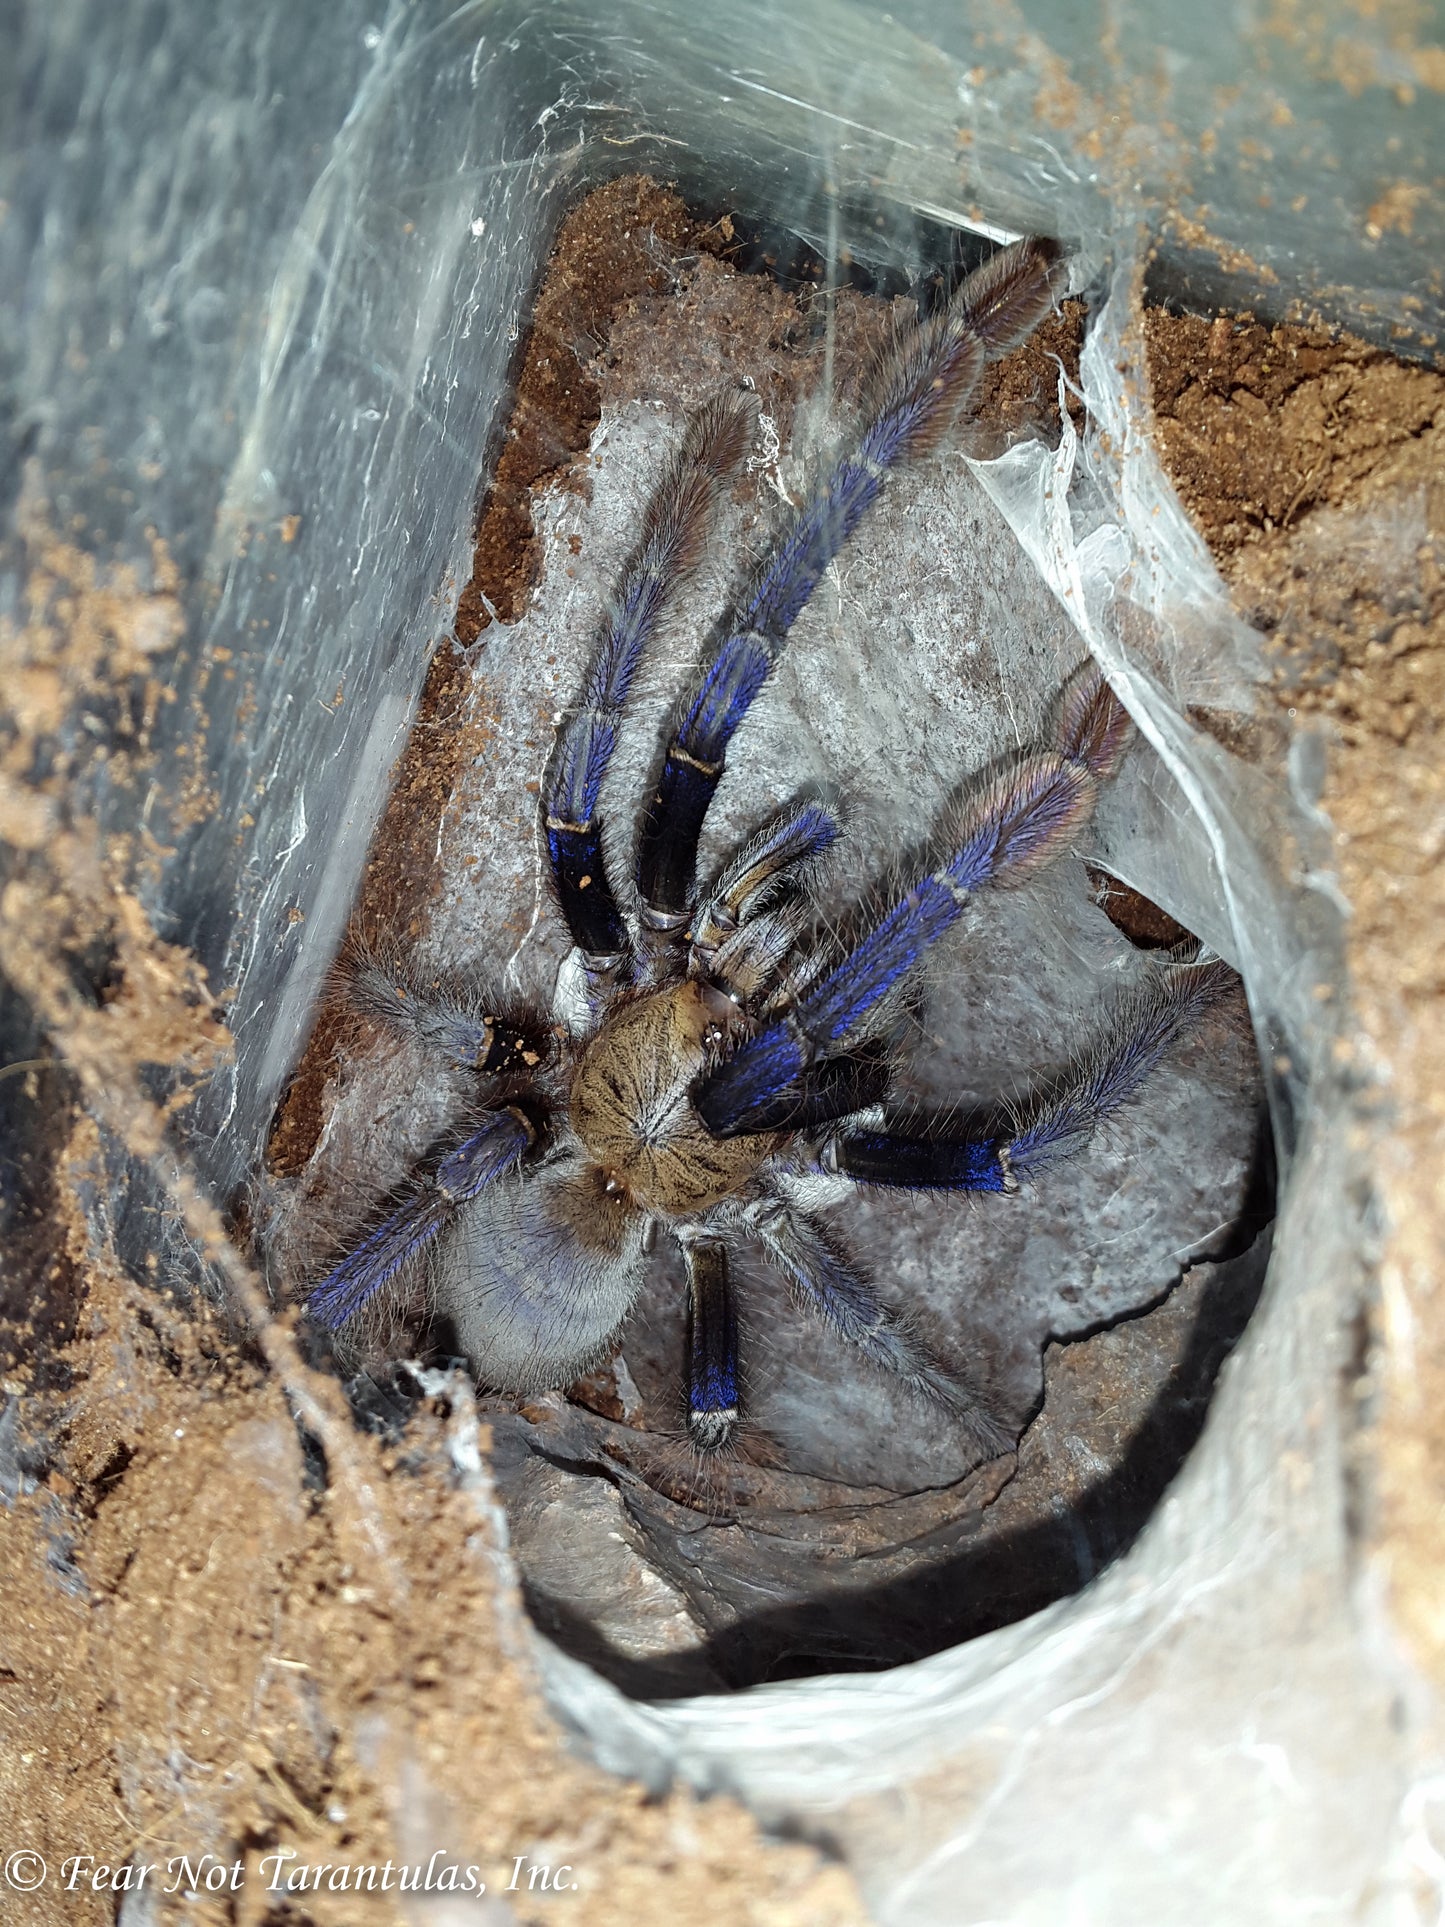 Omothymus violaceopes (Singapore Blue Tarantula) about 1" FREE for orders $225 and over (after discounts and does not include shipping) One freebie per shipment